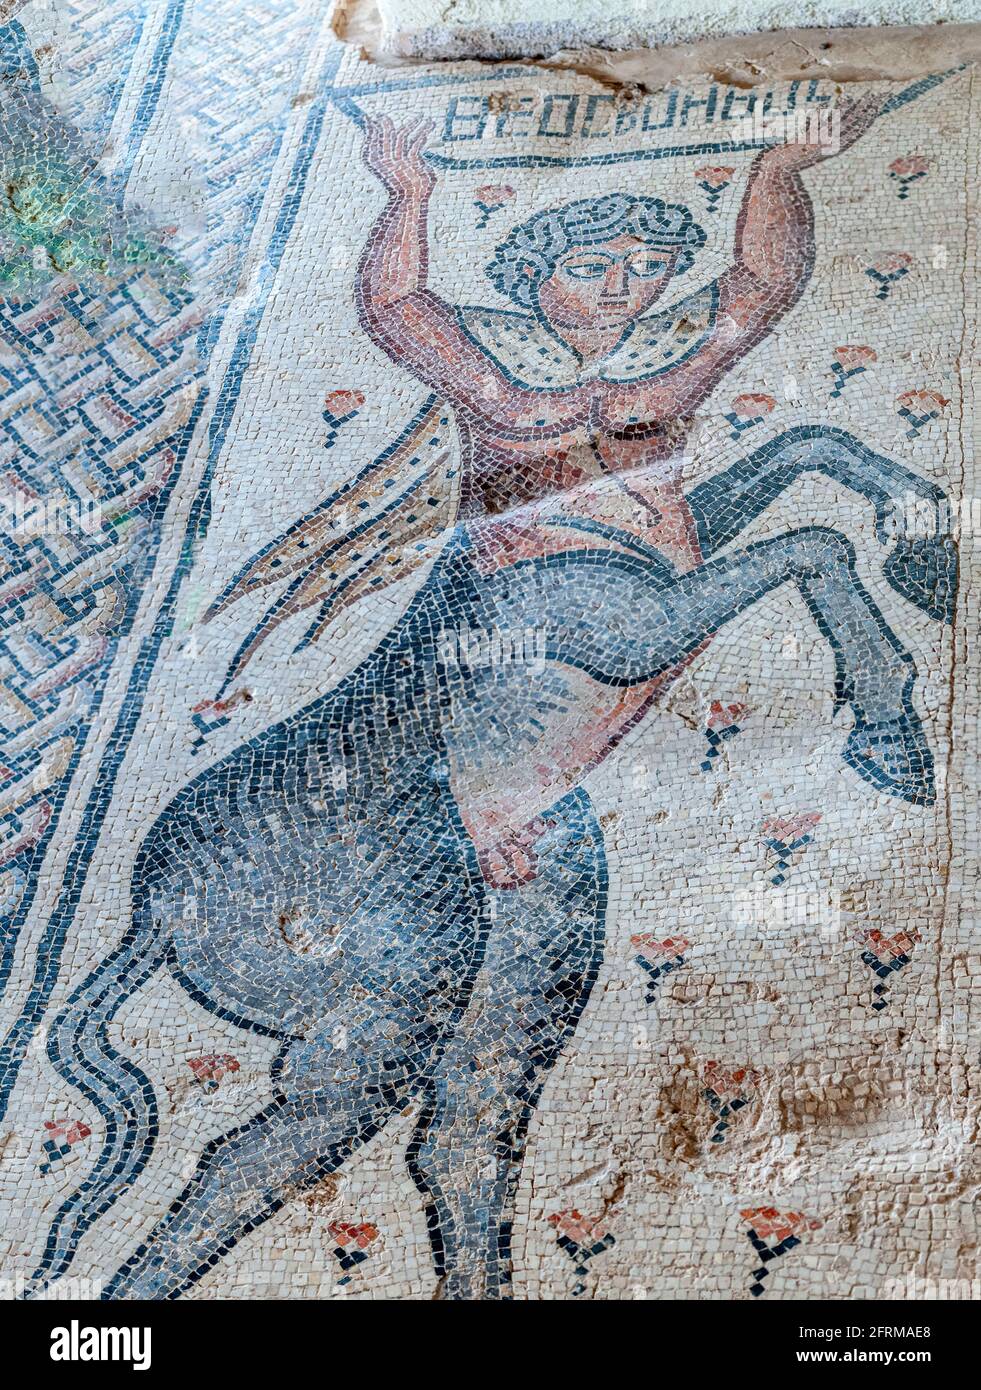 The Centaur mosaic from ' Beyond the Nile ' Mosaic (detail) in the Nile House at Zippori National Park The city of Zippori (Sepphoris) A Roman Byzanti Stock Photo